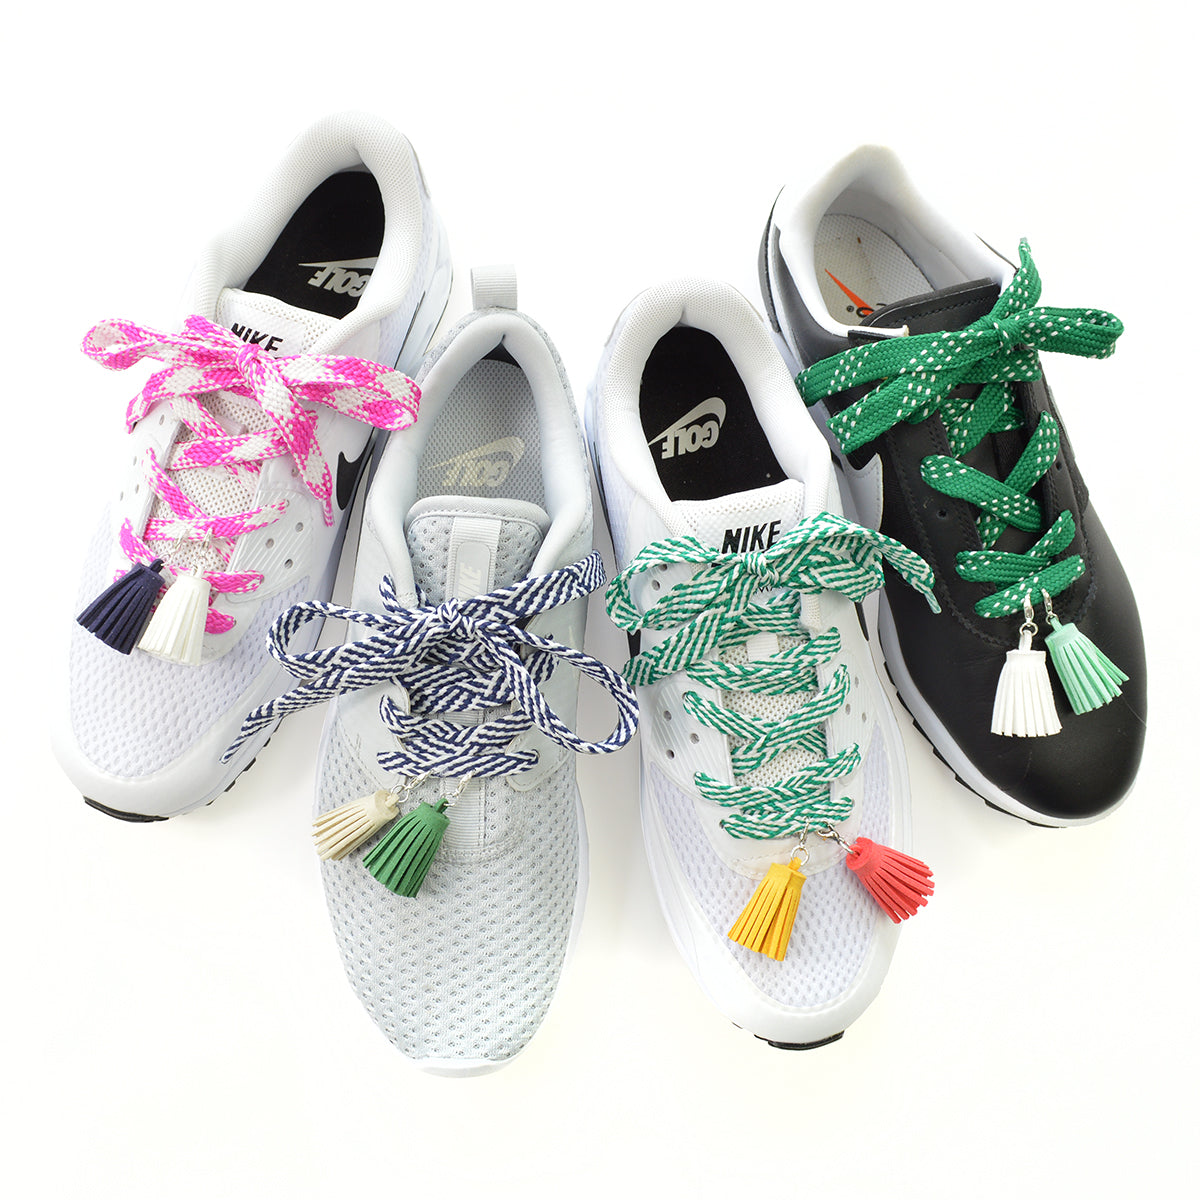 Limited edition shoe tassels (2pc)